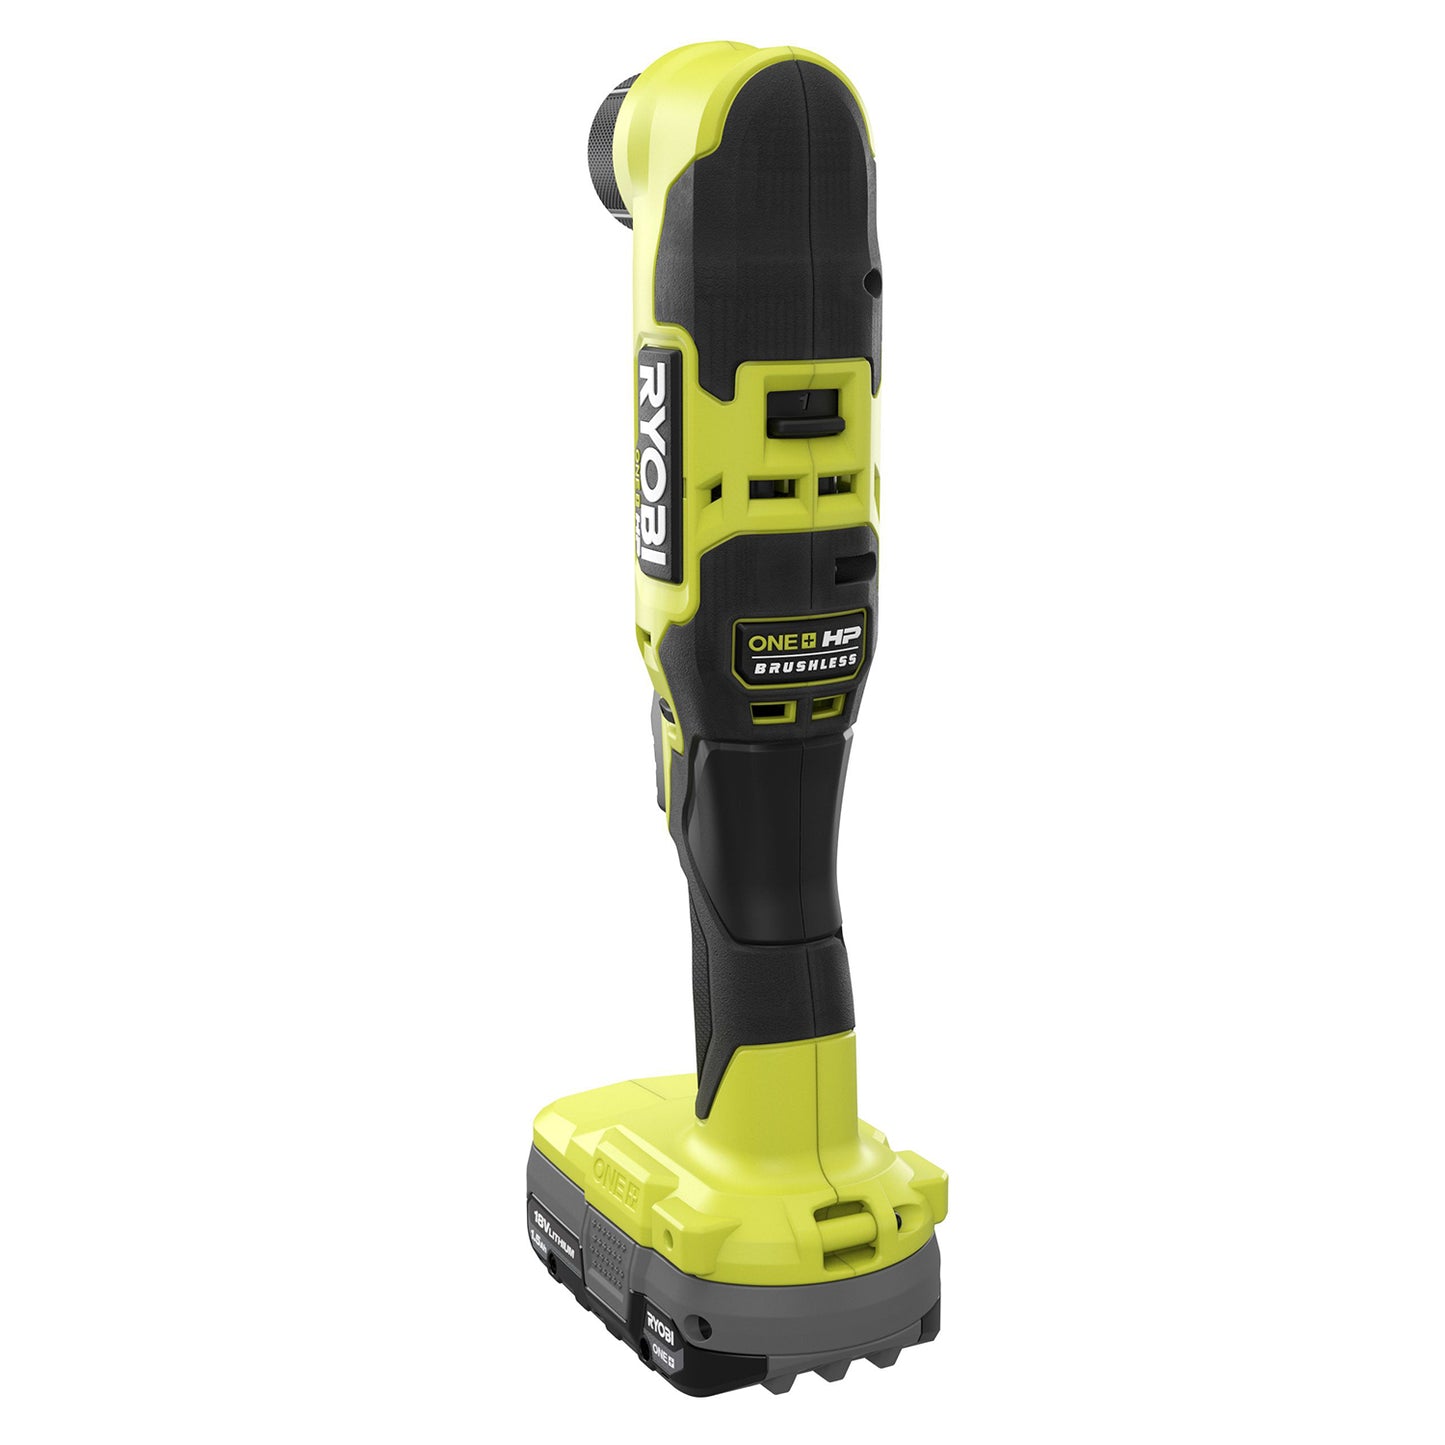 Ryobi One Plus HP 18V Brushless Cordless Compact 3/8in Angle Drill (Tool Only) Damaged Box